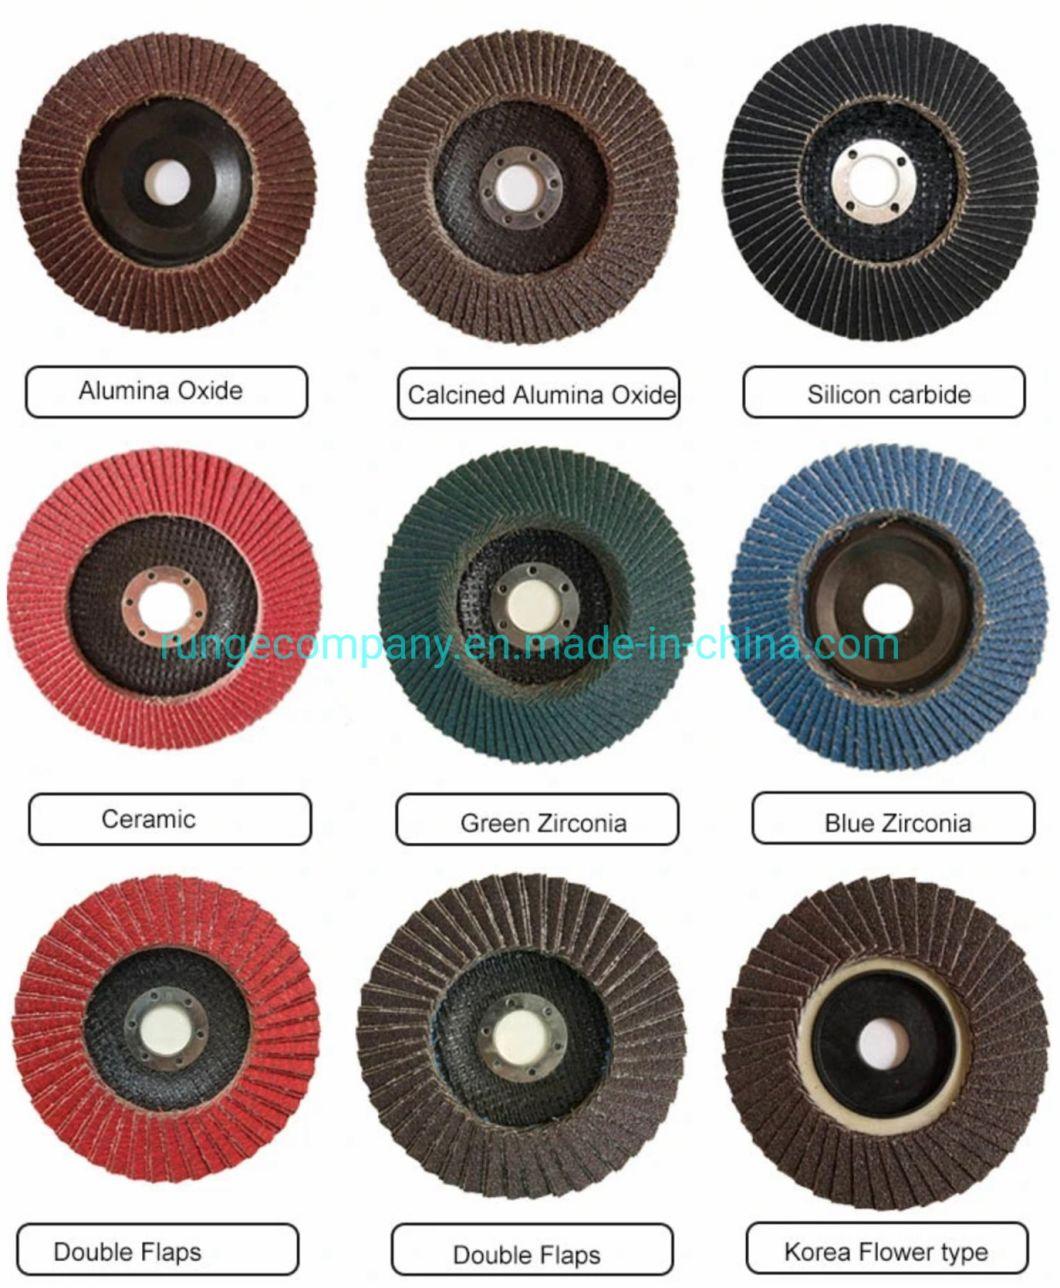 Power Electric Tools Accessories 3" Resin Metal Cutting Blade Disc Cut off Wheel Abrasive Disks for Metal